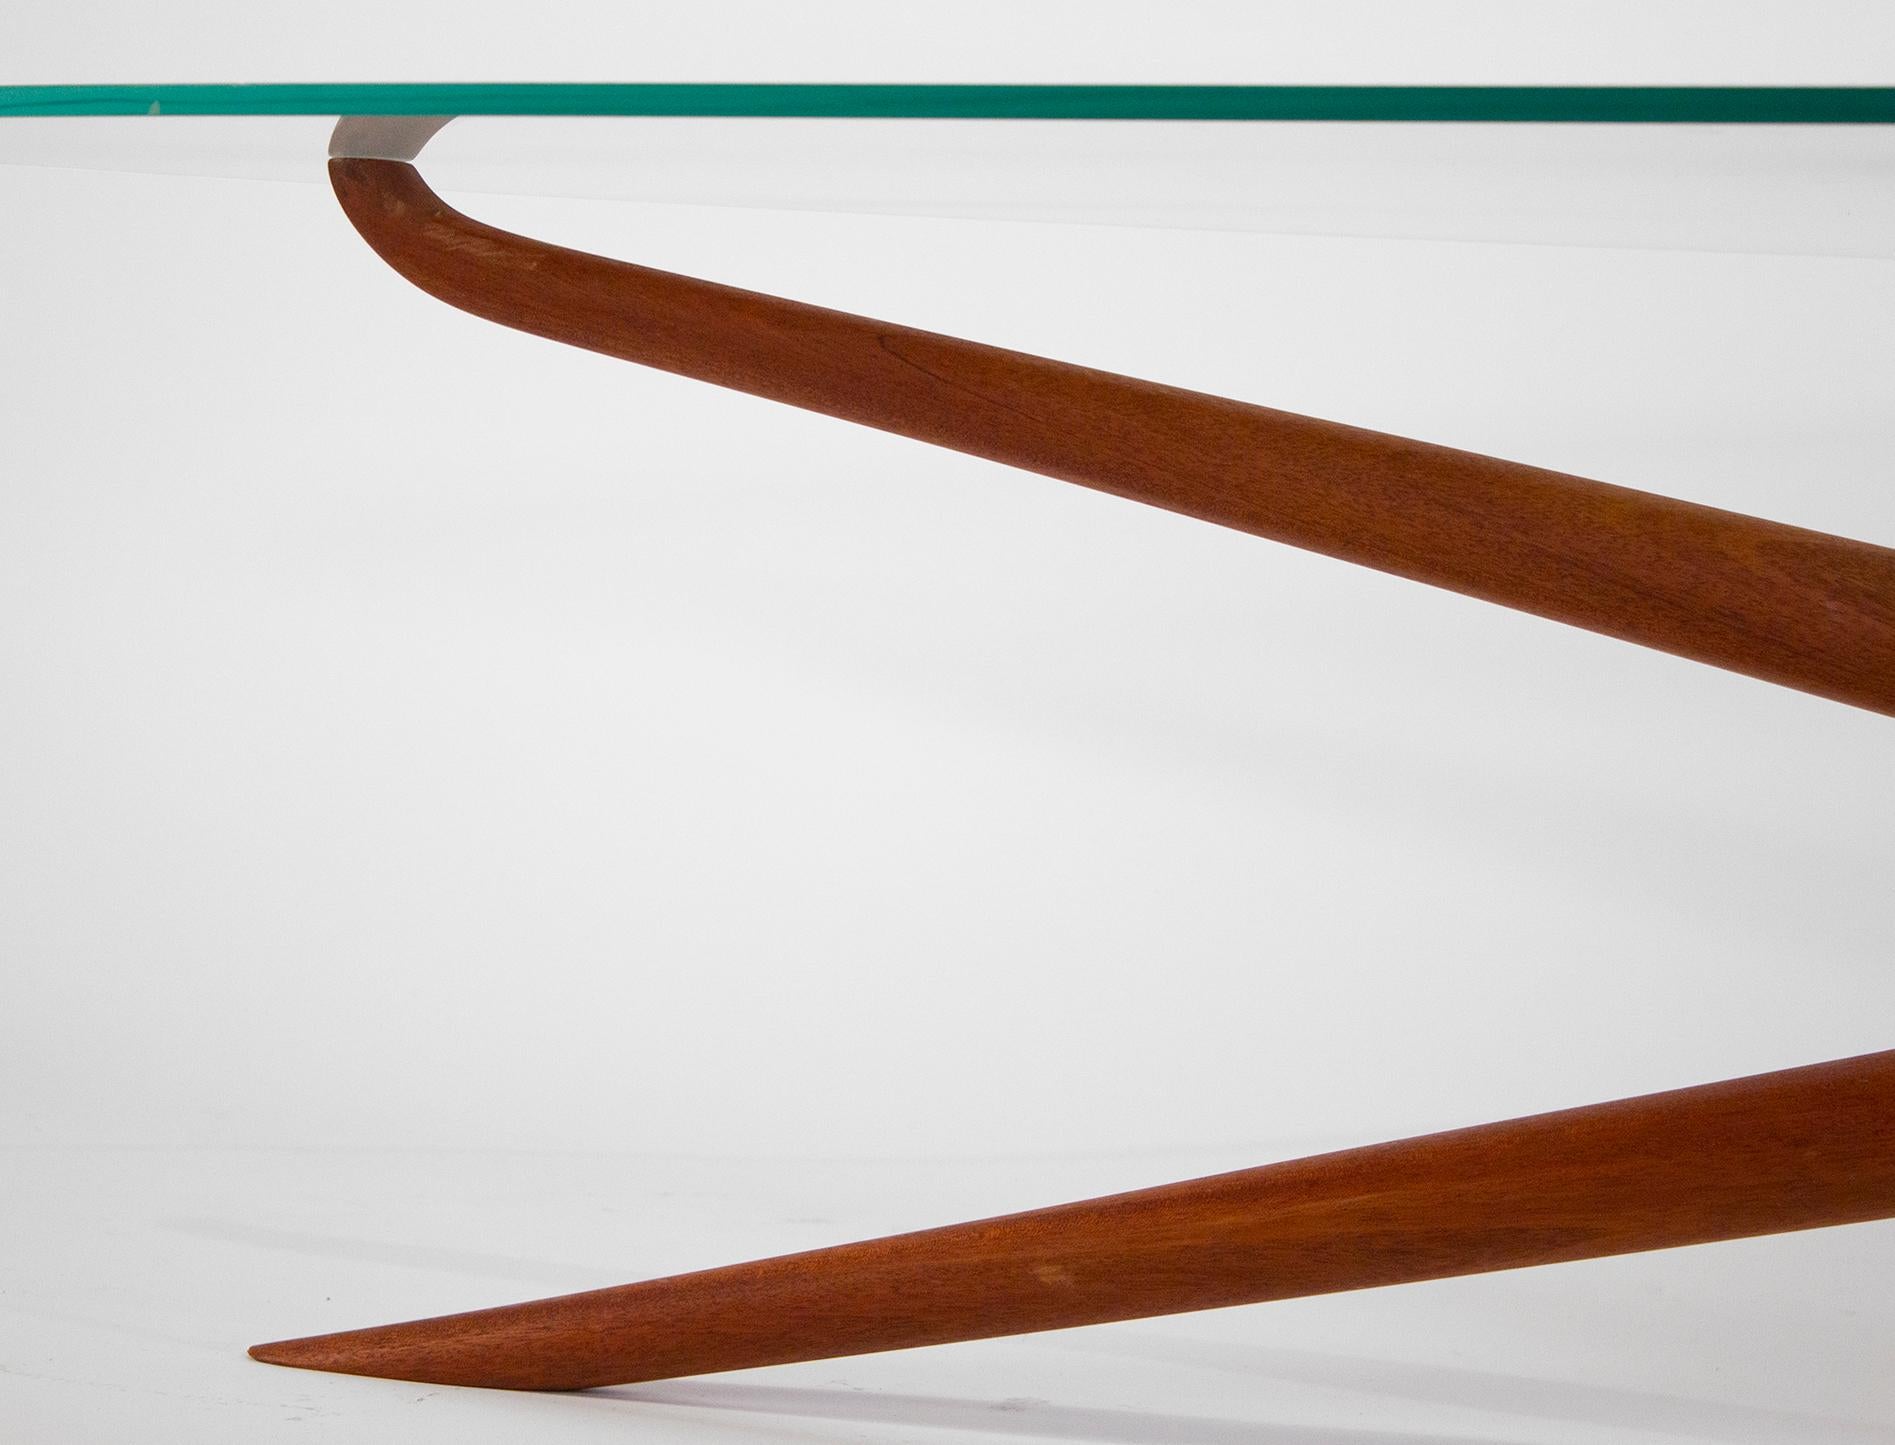 20th Century Mid-Century Modern Tri-Symmetric Organic Coffee Table in Mahogany with Glass Top For Sale